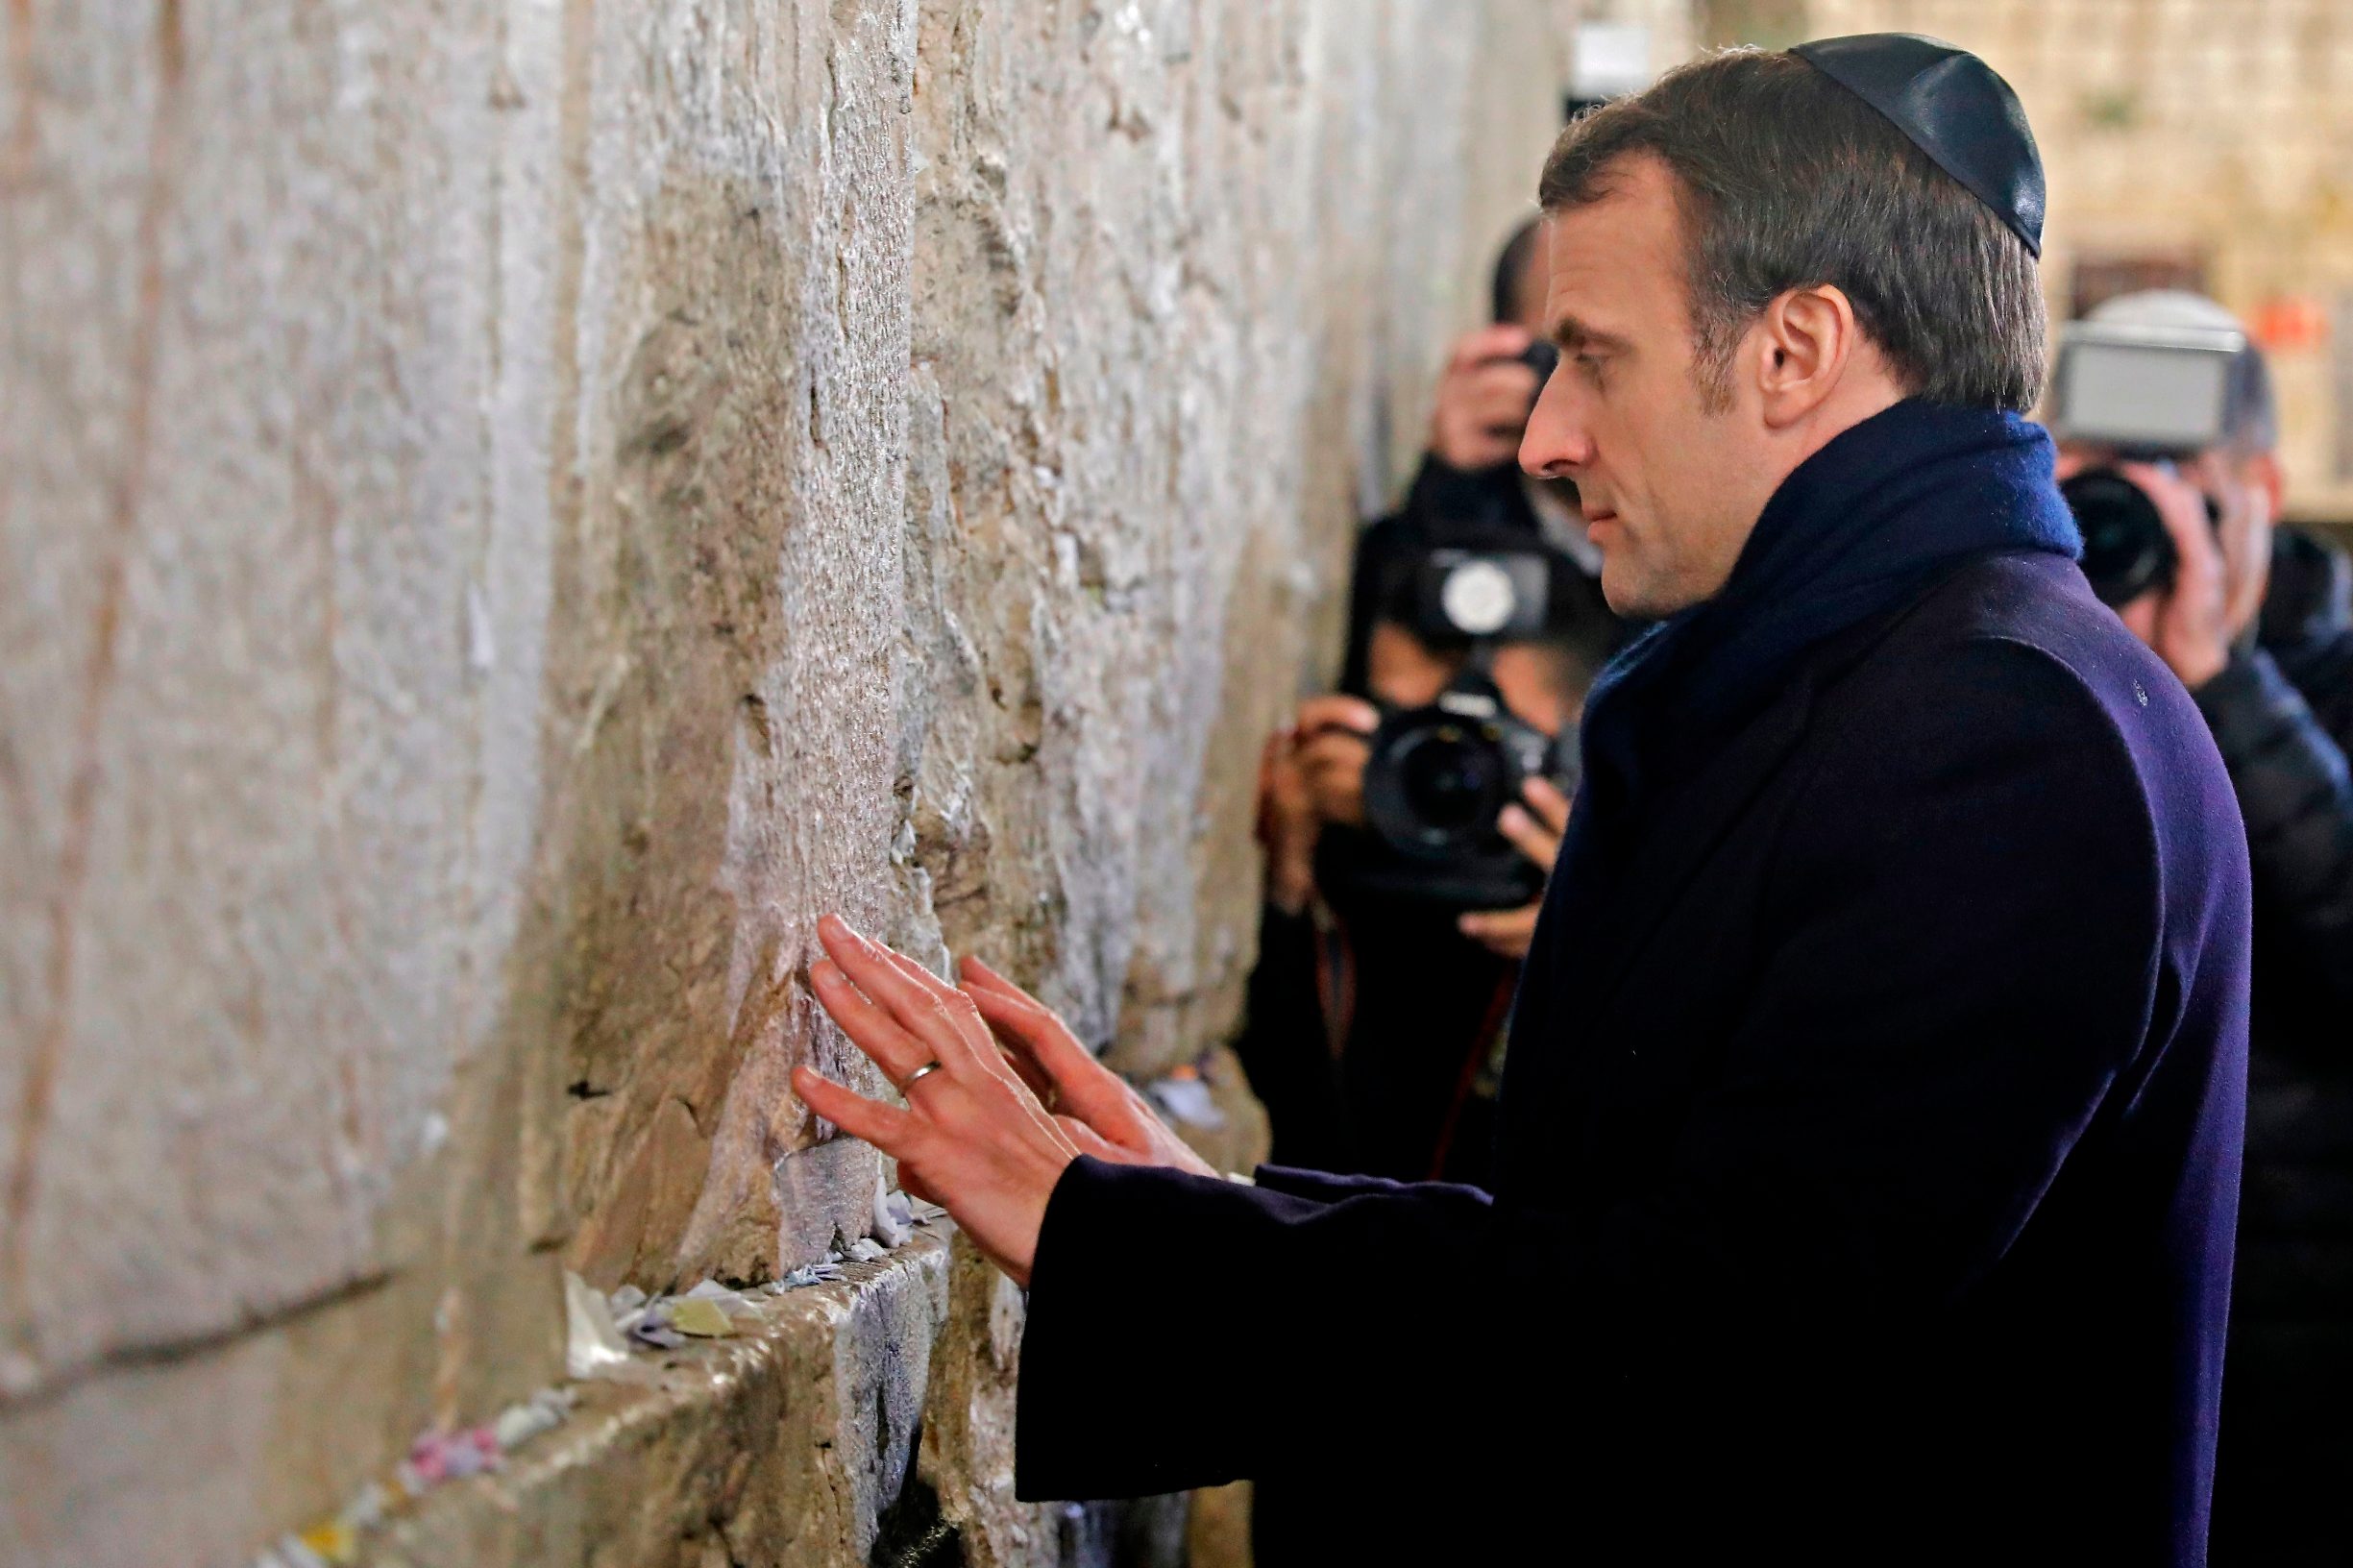 TOPSHOT - French President Emmanuel Macron prays at the Western Wall, Judaism's holiest prayer site, in Jerusalem's Old City on January 22, 2020. - World leaders are to travel to Israel this week to mark 75 years since the Red Army liberated Auschwitz, the extermination camp where the Nazis killed over a million Jews. Thousands of police officers and other security forces will deploy from today, ahead of the arrival of dignitaries including Russian President Vladimir Putin, French President Emmanuel Macron and US Vice President Mike Pence. (Photo by Ahmad GHARABLI / AFP)